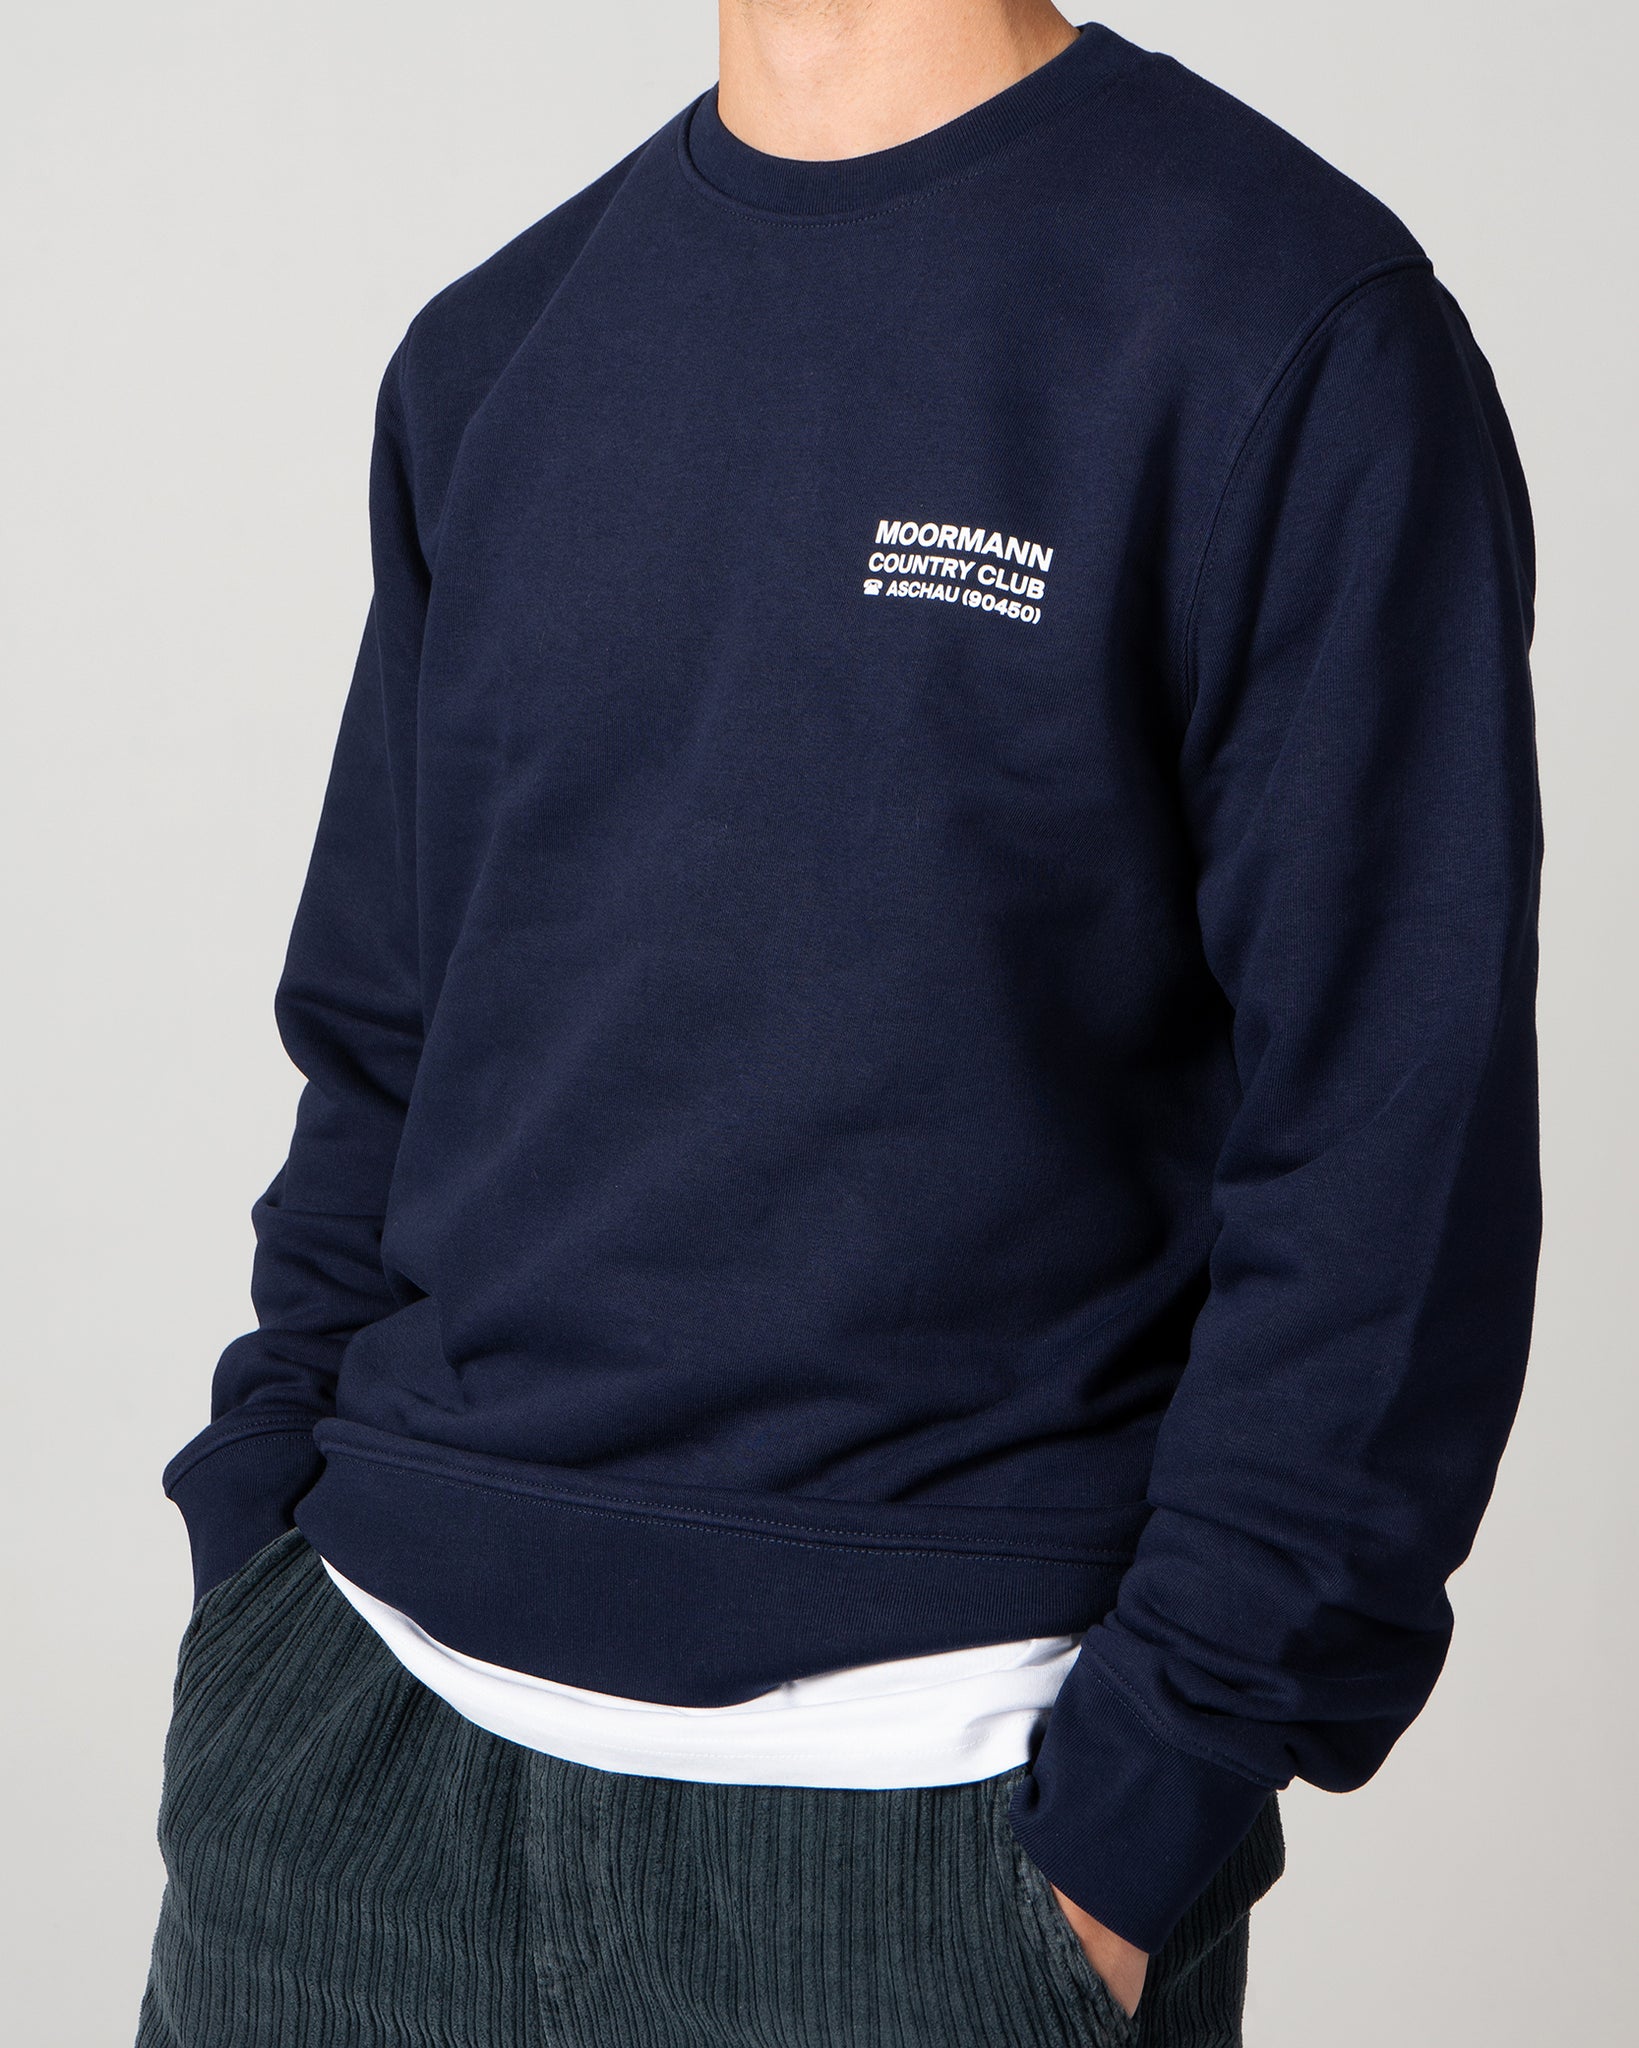 Moormann Country Club Pullover